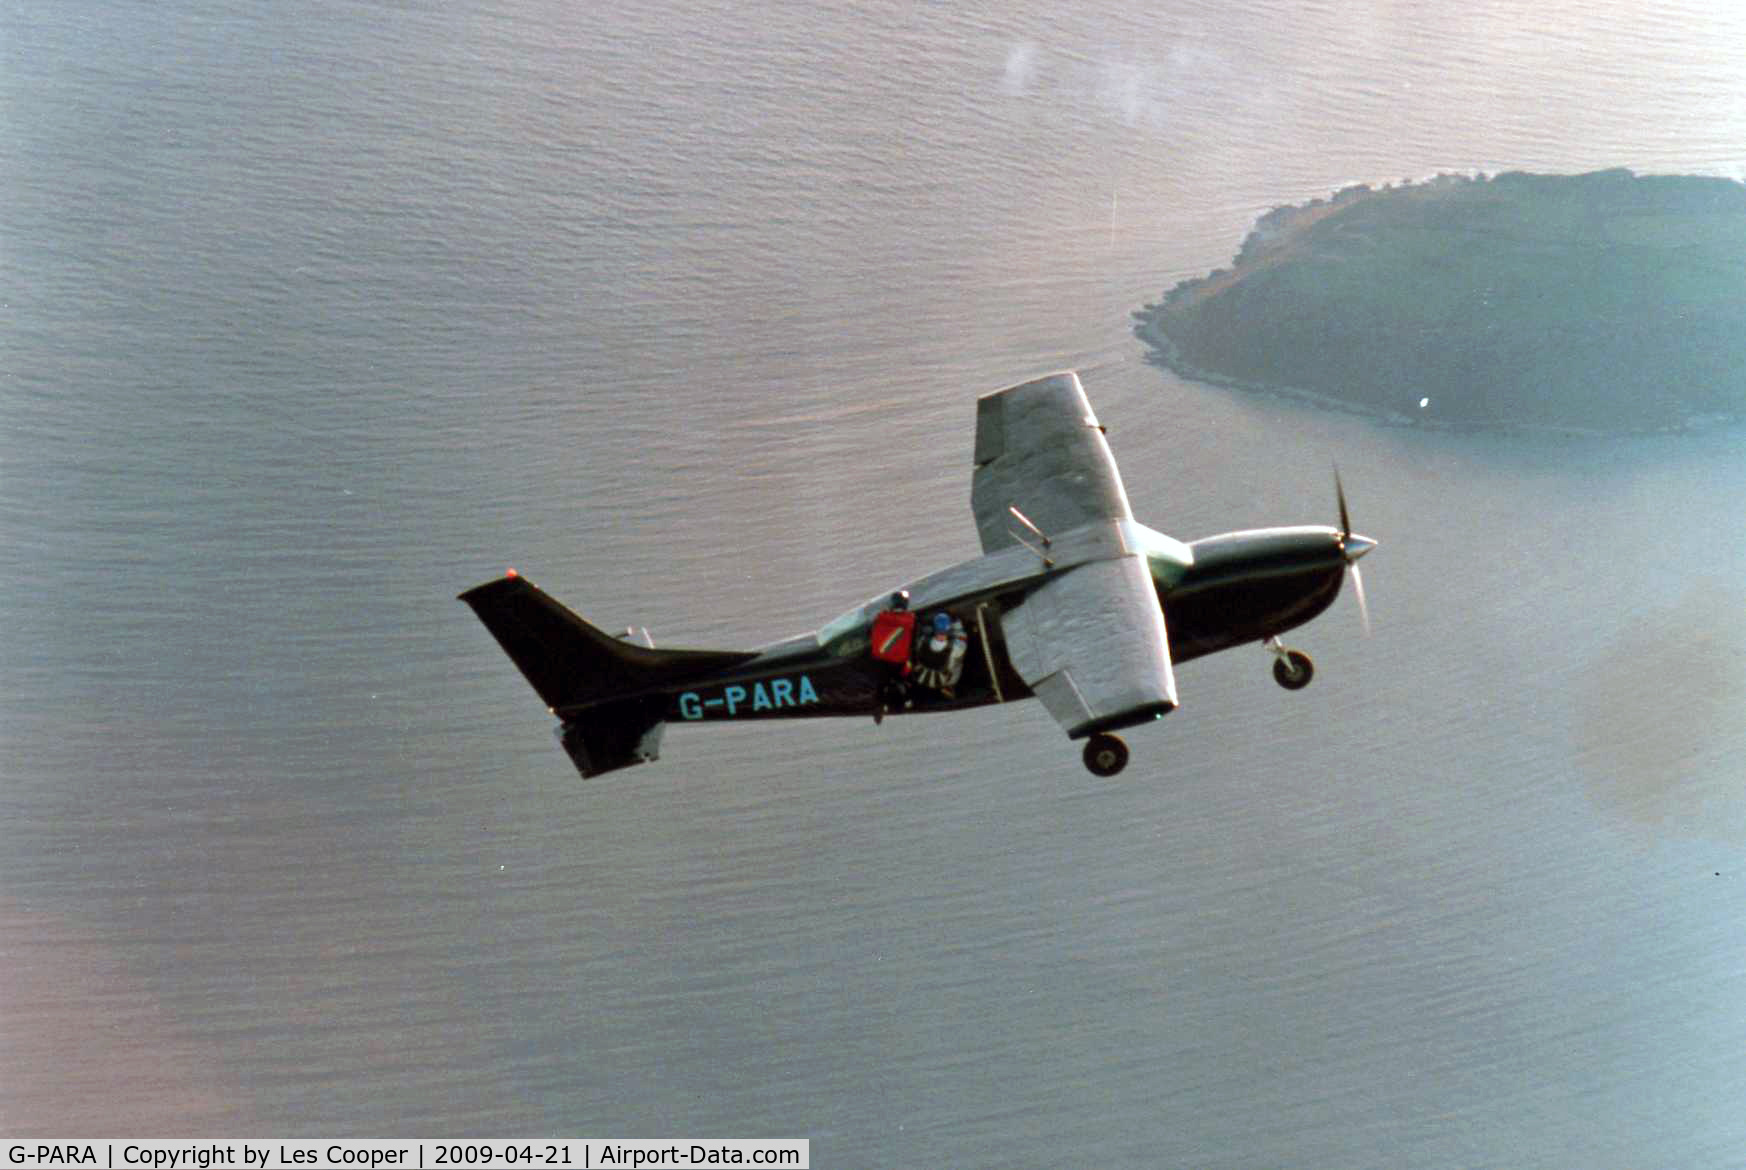 G-PARA, 1970 Cessna 207 Skywagon C/N 207-00153, Skydivers climb out of G-PARA over The Gower on the run-in to Swansea Parachute Club Drop Zone.